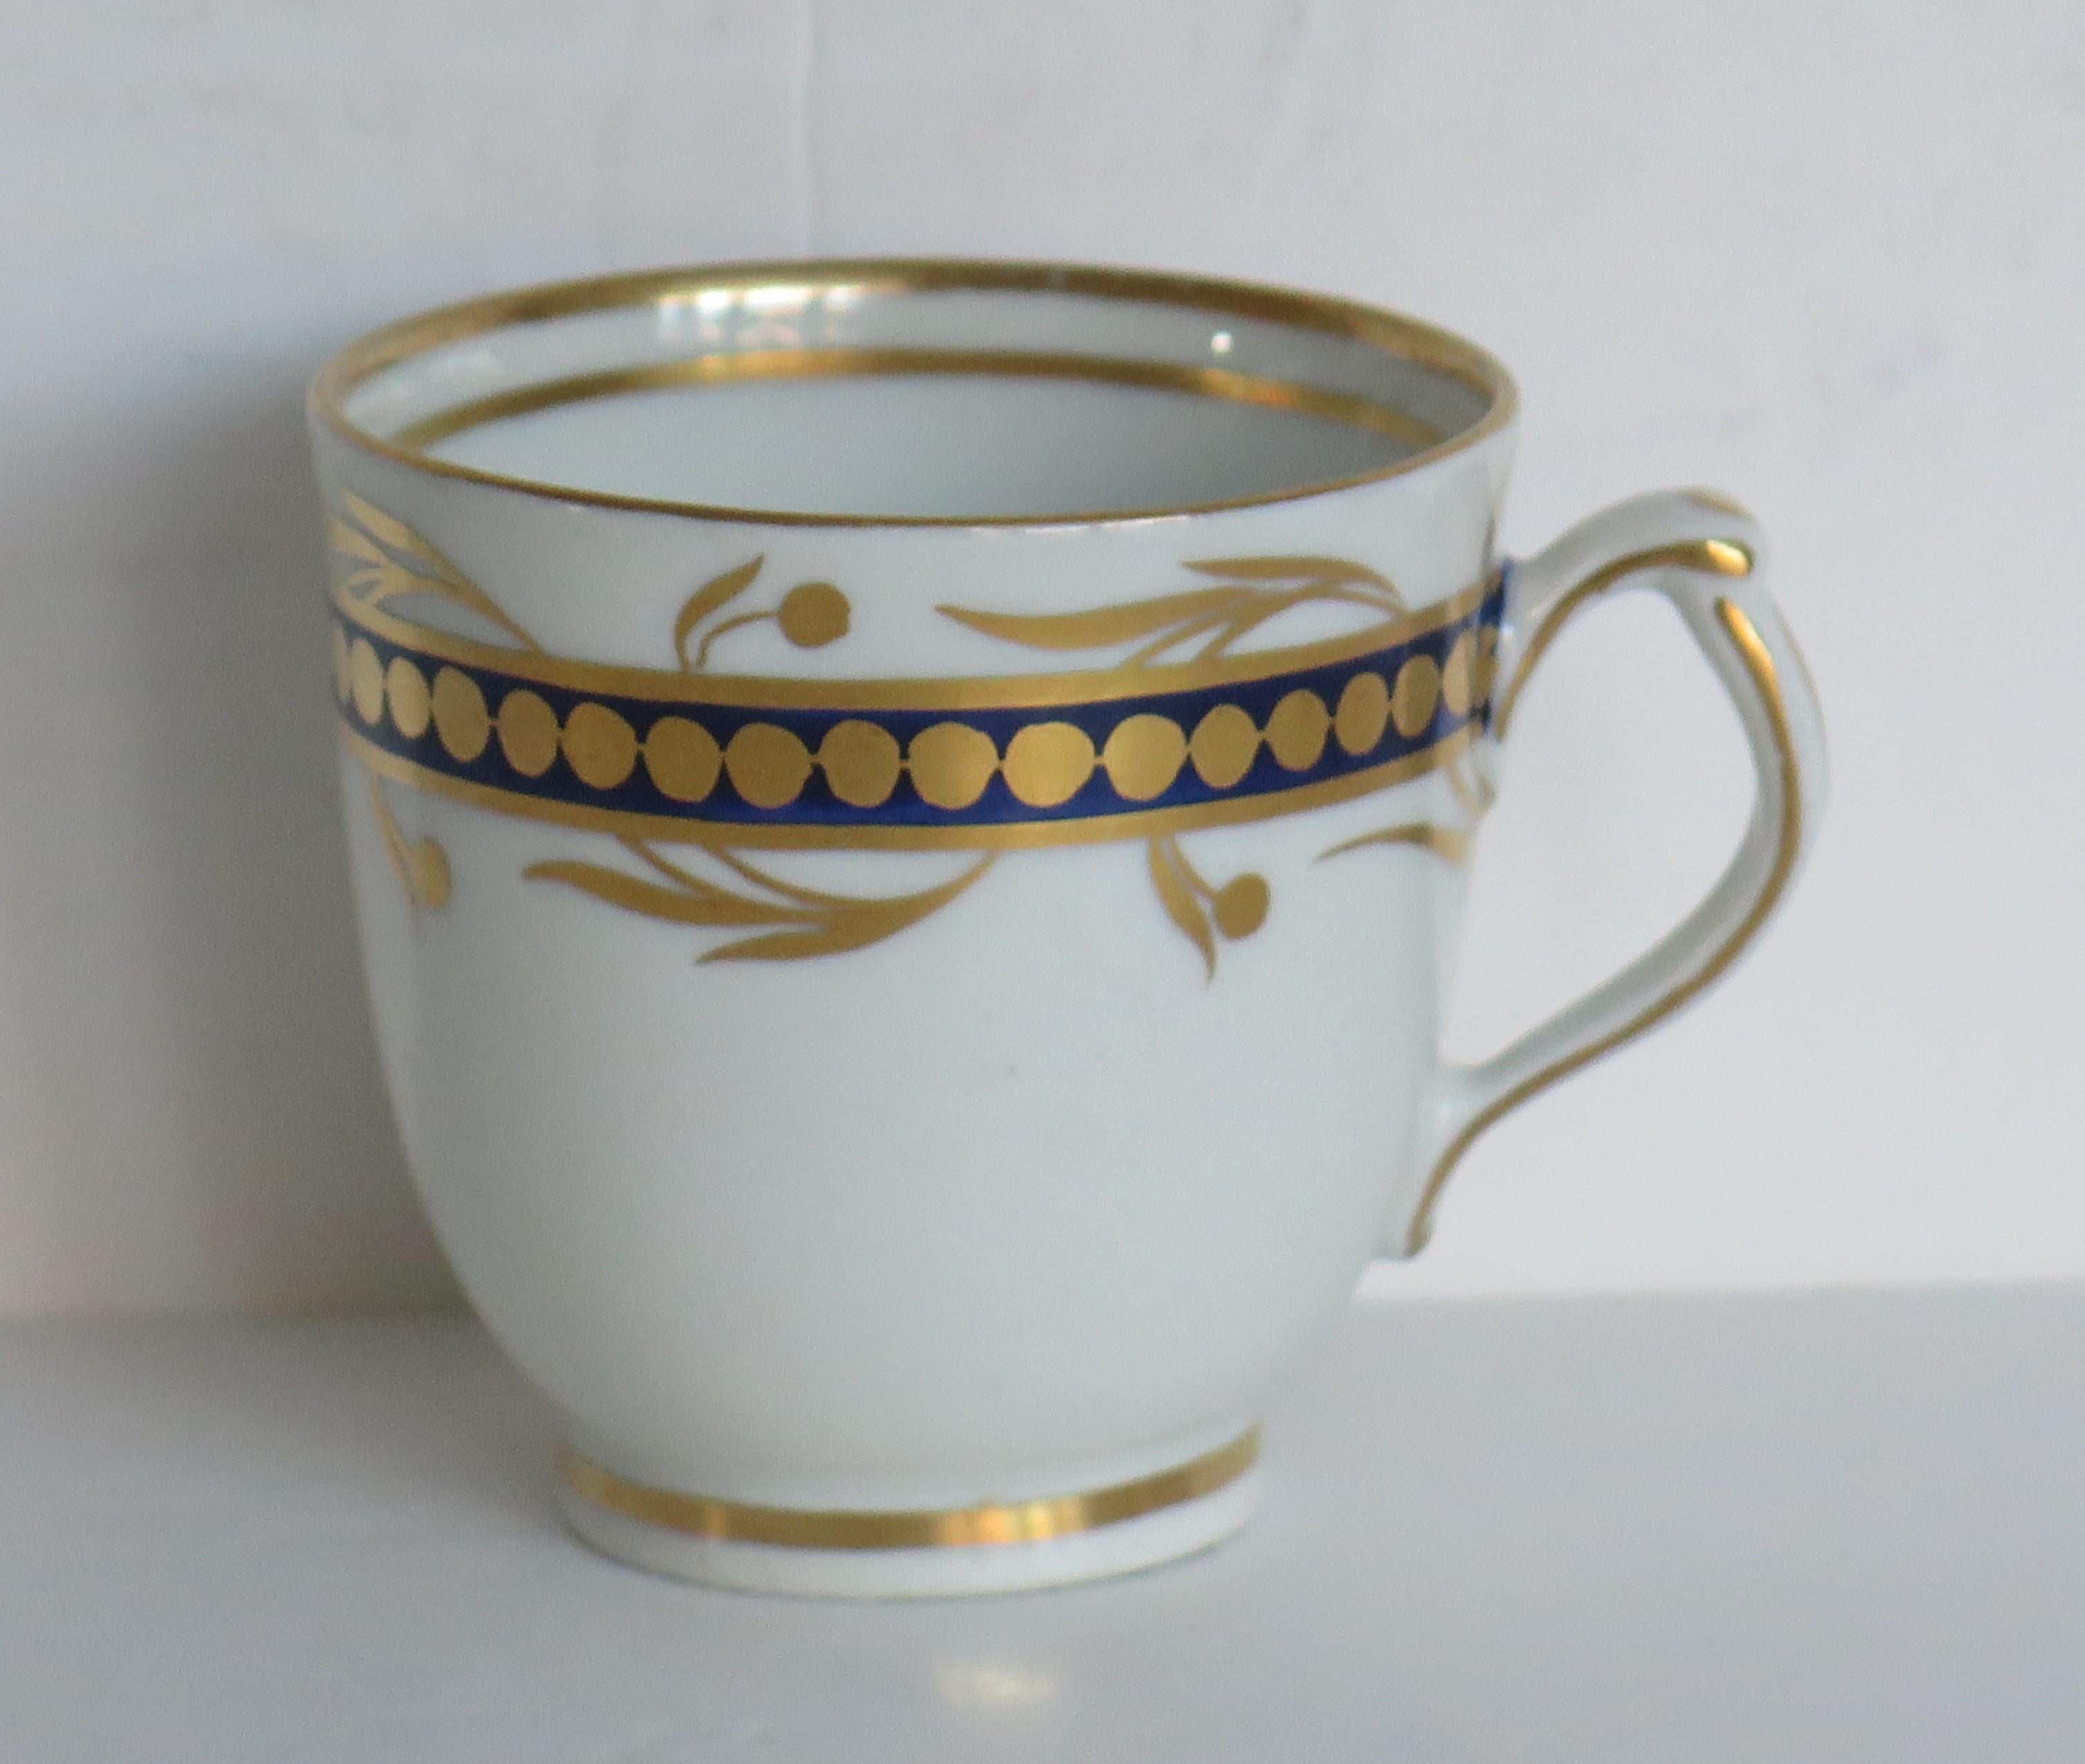 This is a porcelain Coffee Cup, attributed to an English Staffordshire maker, in the early 19th century George 111rd period, circa 1805-1810.

The piece is well potted on a low foot with a plain loop handle, having an upper thumb spur.

The cup